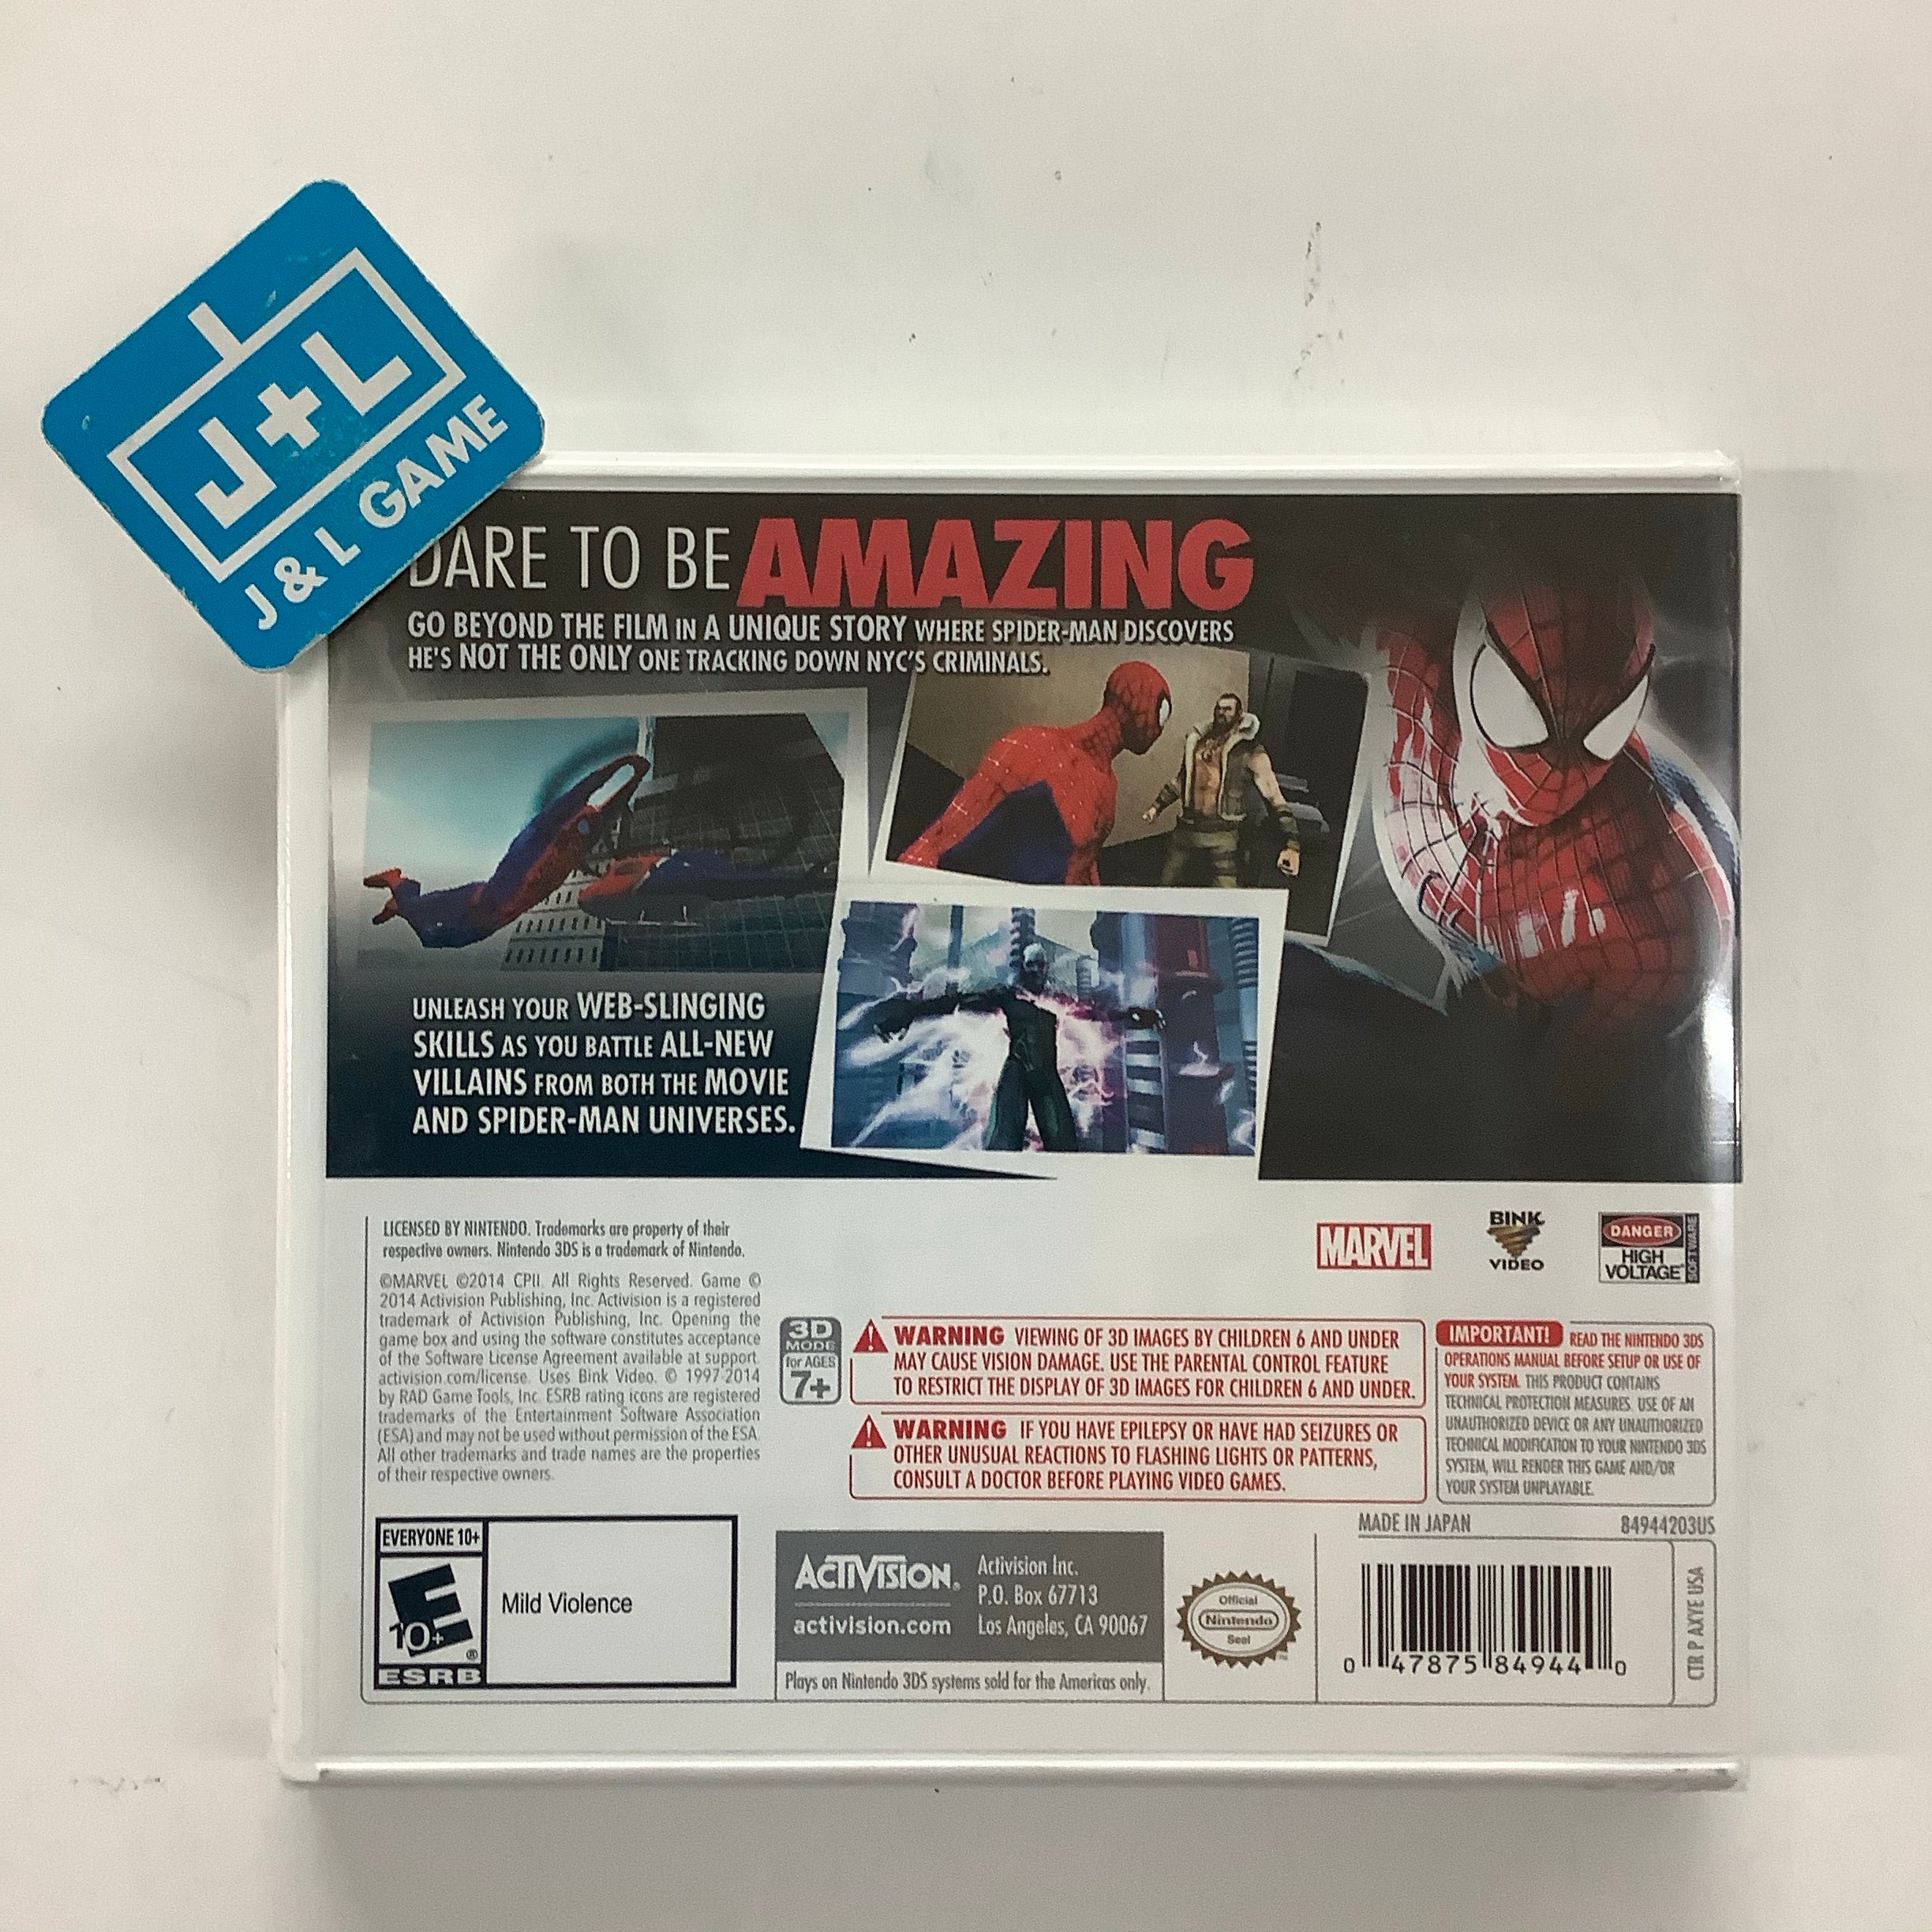 The Amazing Spider-Man 2 - Nintendo 3DS Video Games Activision   